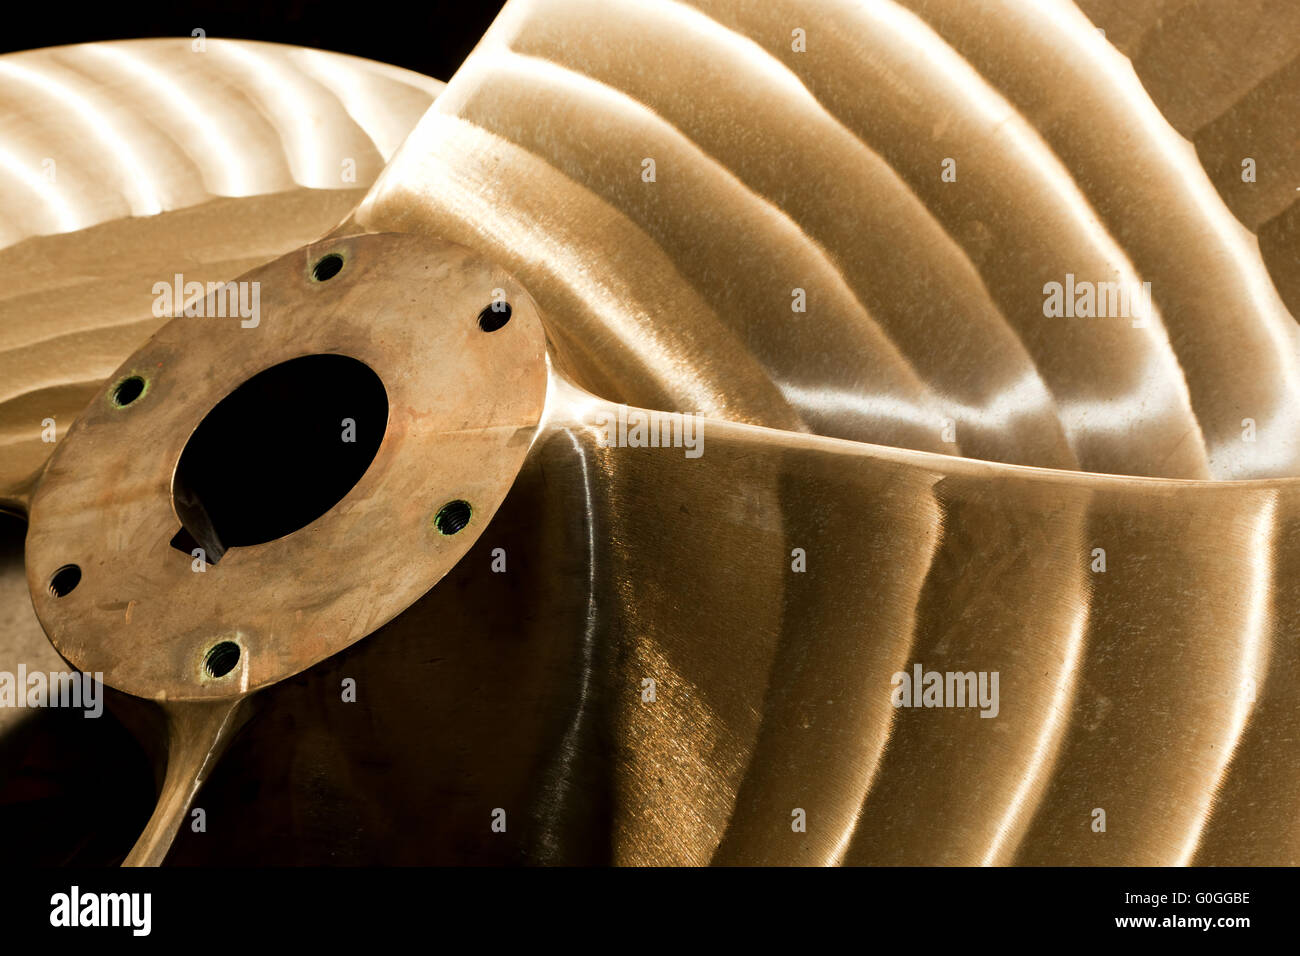 Heavy industrial shipbuilding element close-up. Industry Stock Photo